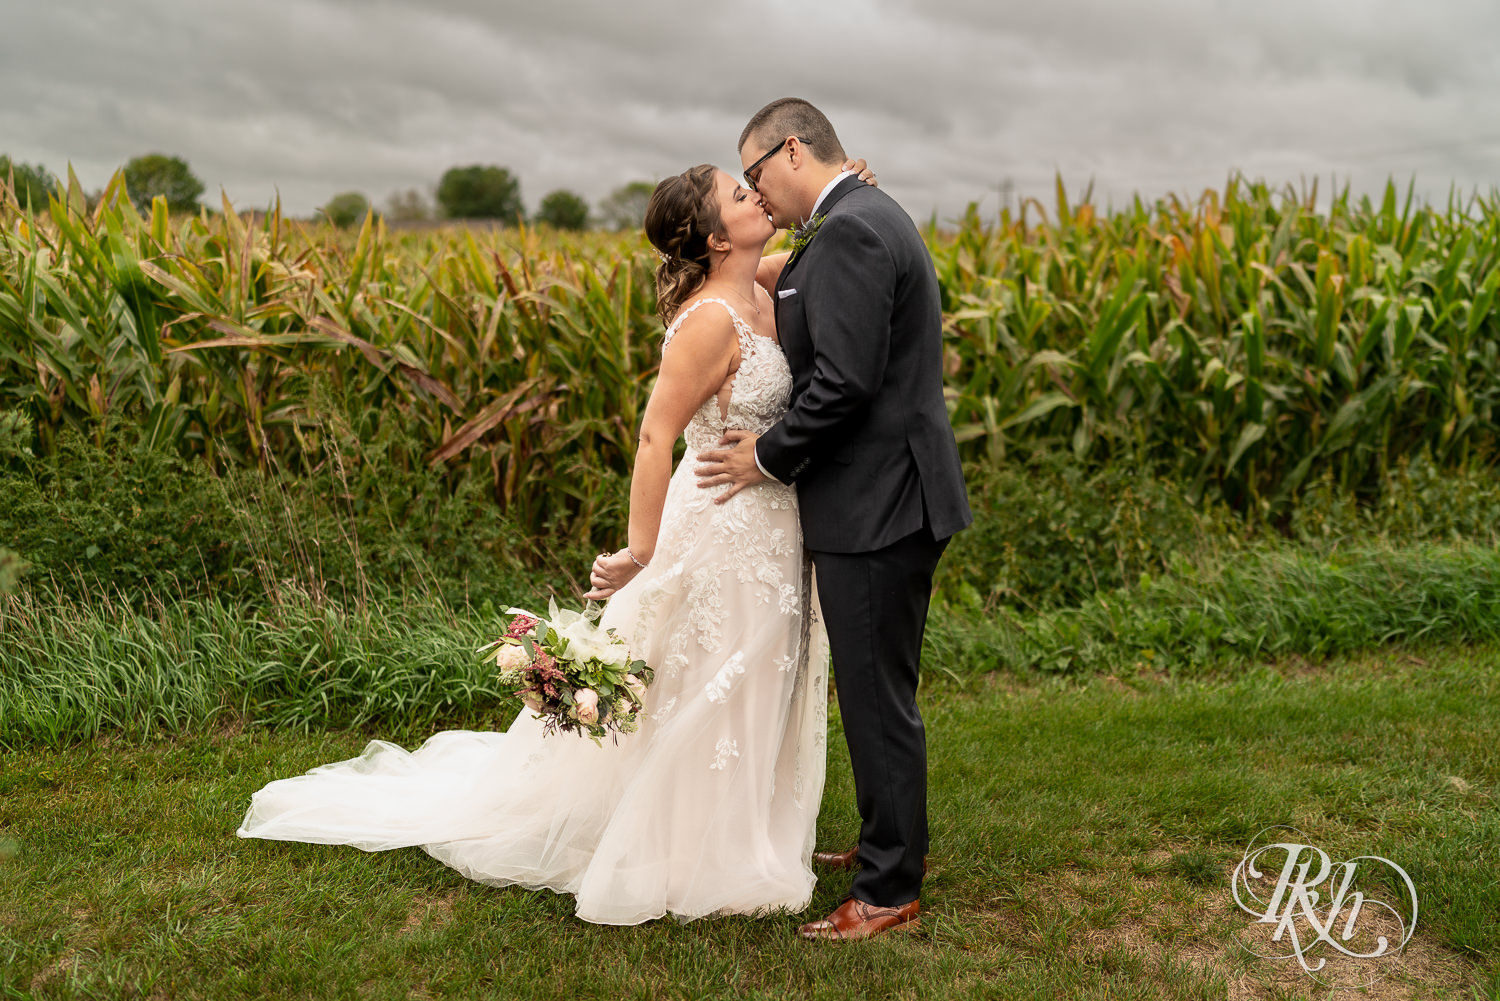 Bride and groom kissing each other in front of cornfield at Glenhaven Events in Farmington, Minnesota.